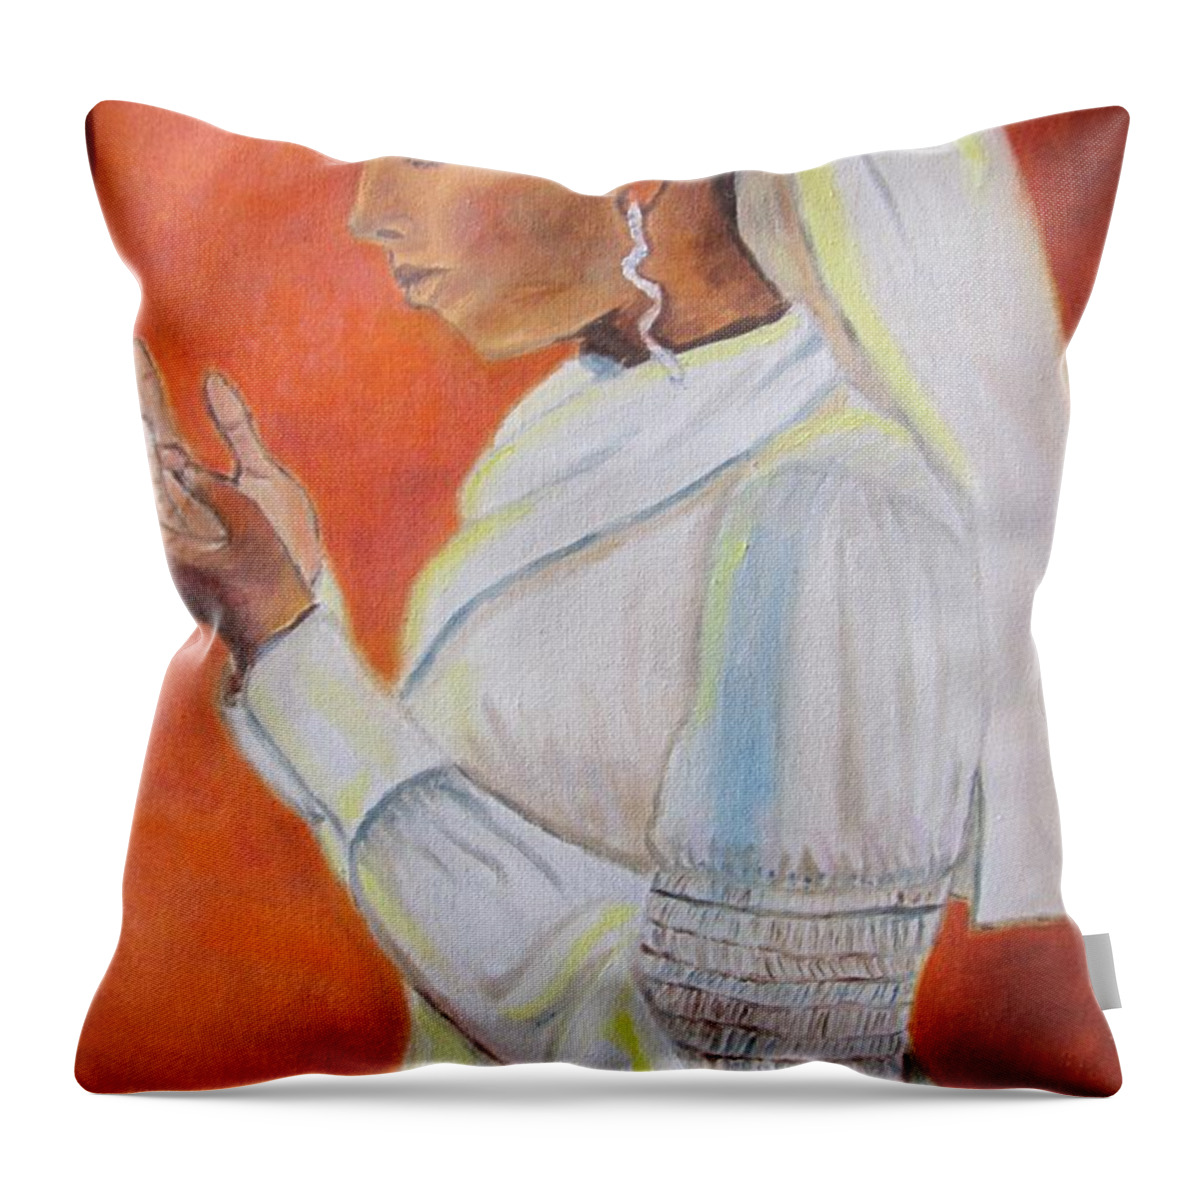 Prayer Muslim Girl Religious Throw Pillow featuring the painting In Prayer by Jennylynd James